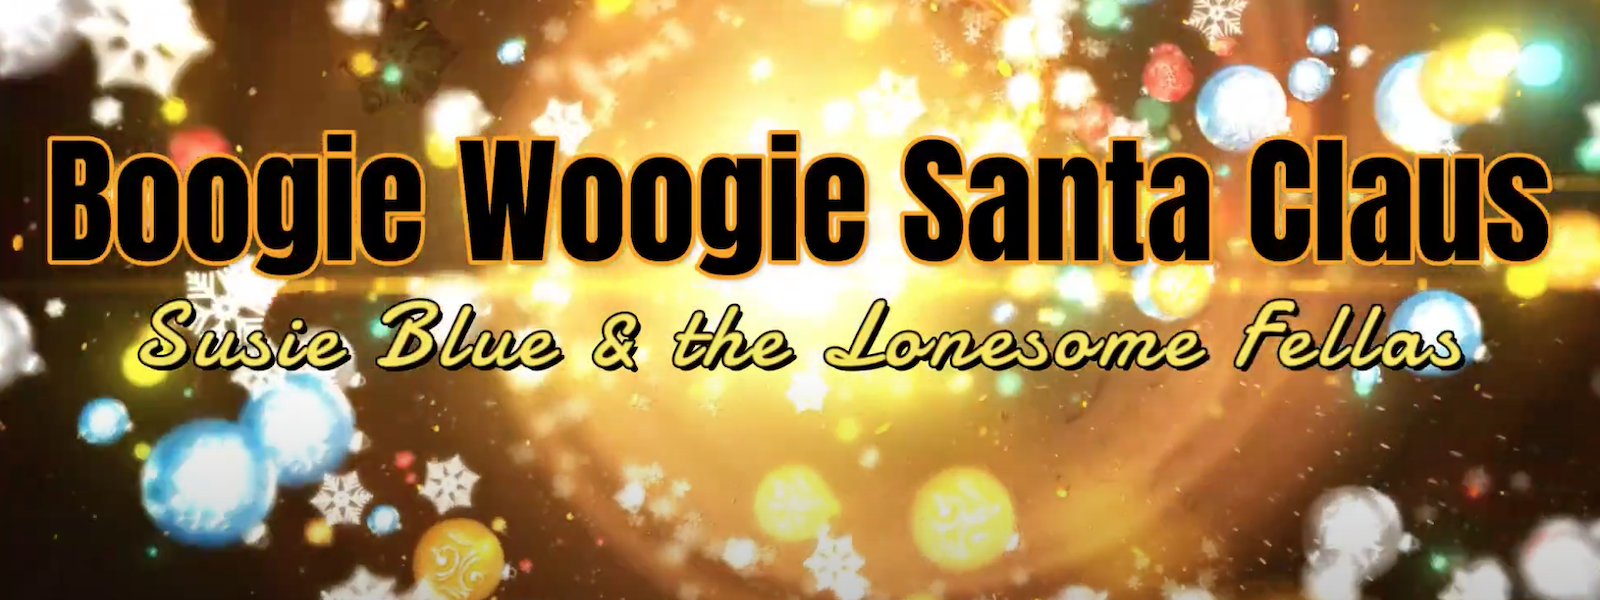 Susie Blue and the Boogie Woogie Santa will boogie all your blues away